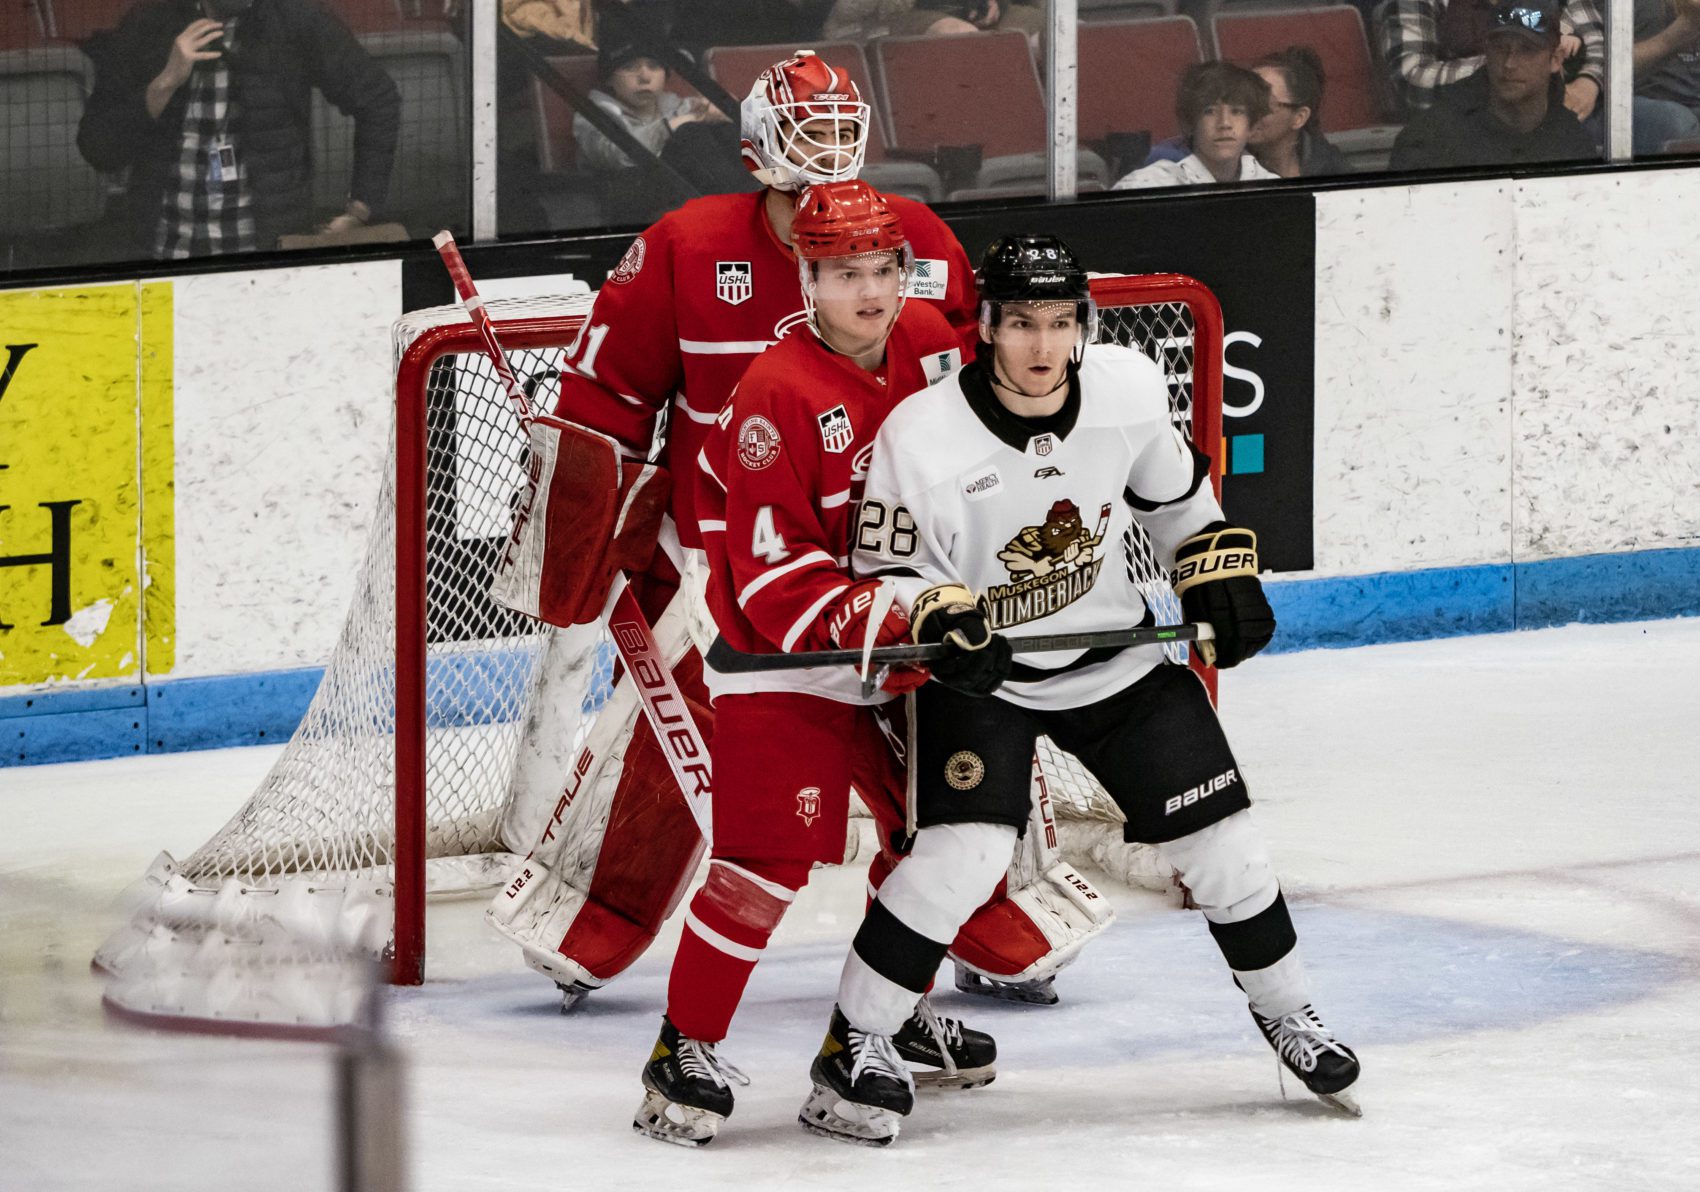 Gridin's OT shootout goal gives Lumberjacks an exciting 3-2 victory in  Dubuque - Muskegon Lumberjacks